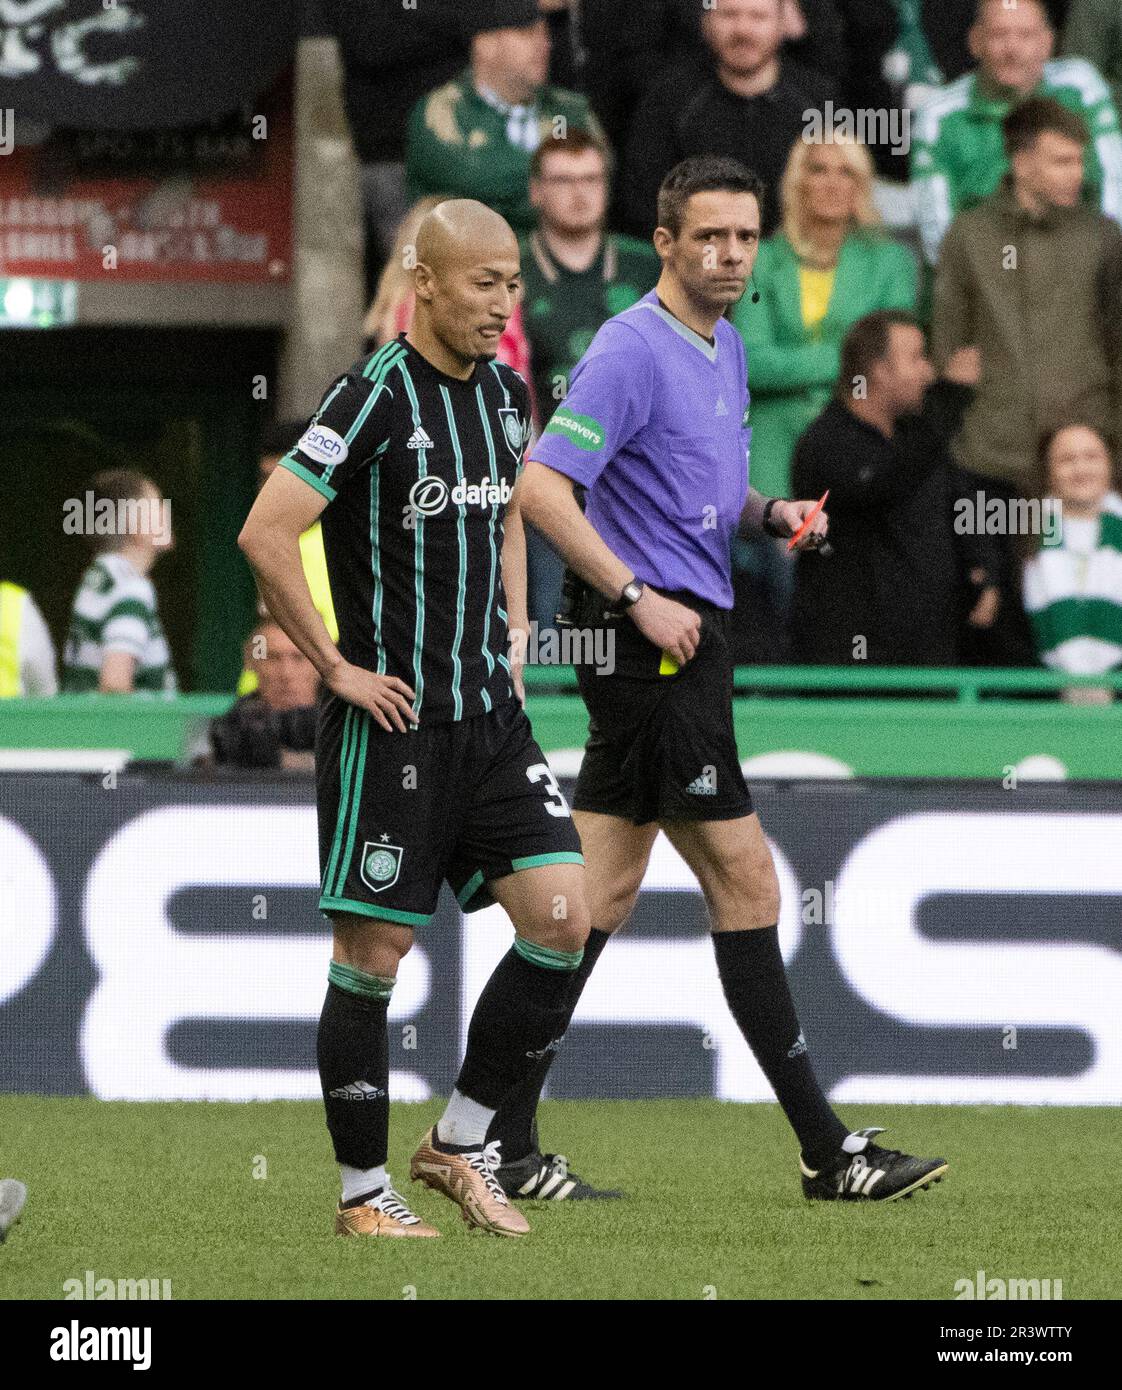 EDINBURGH, UK. 24th May, 2023. Celtic forward, Daizen Maeda, is given his marching order by Match referee, Kevin Clancy, during the match between Hibernian and Celtic in the cinch Premiership at Easter Road Stadium, Edinburgh, Midlothian, UK. 24/5/2023. Credit: Ian Jacobs/Alamy Live News Stock Photo